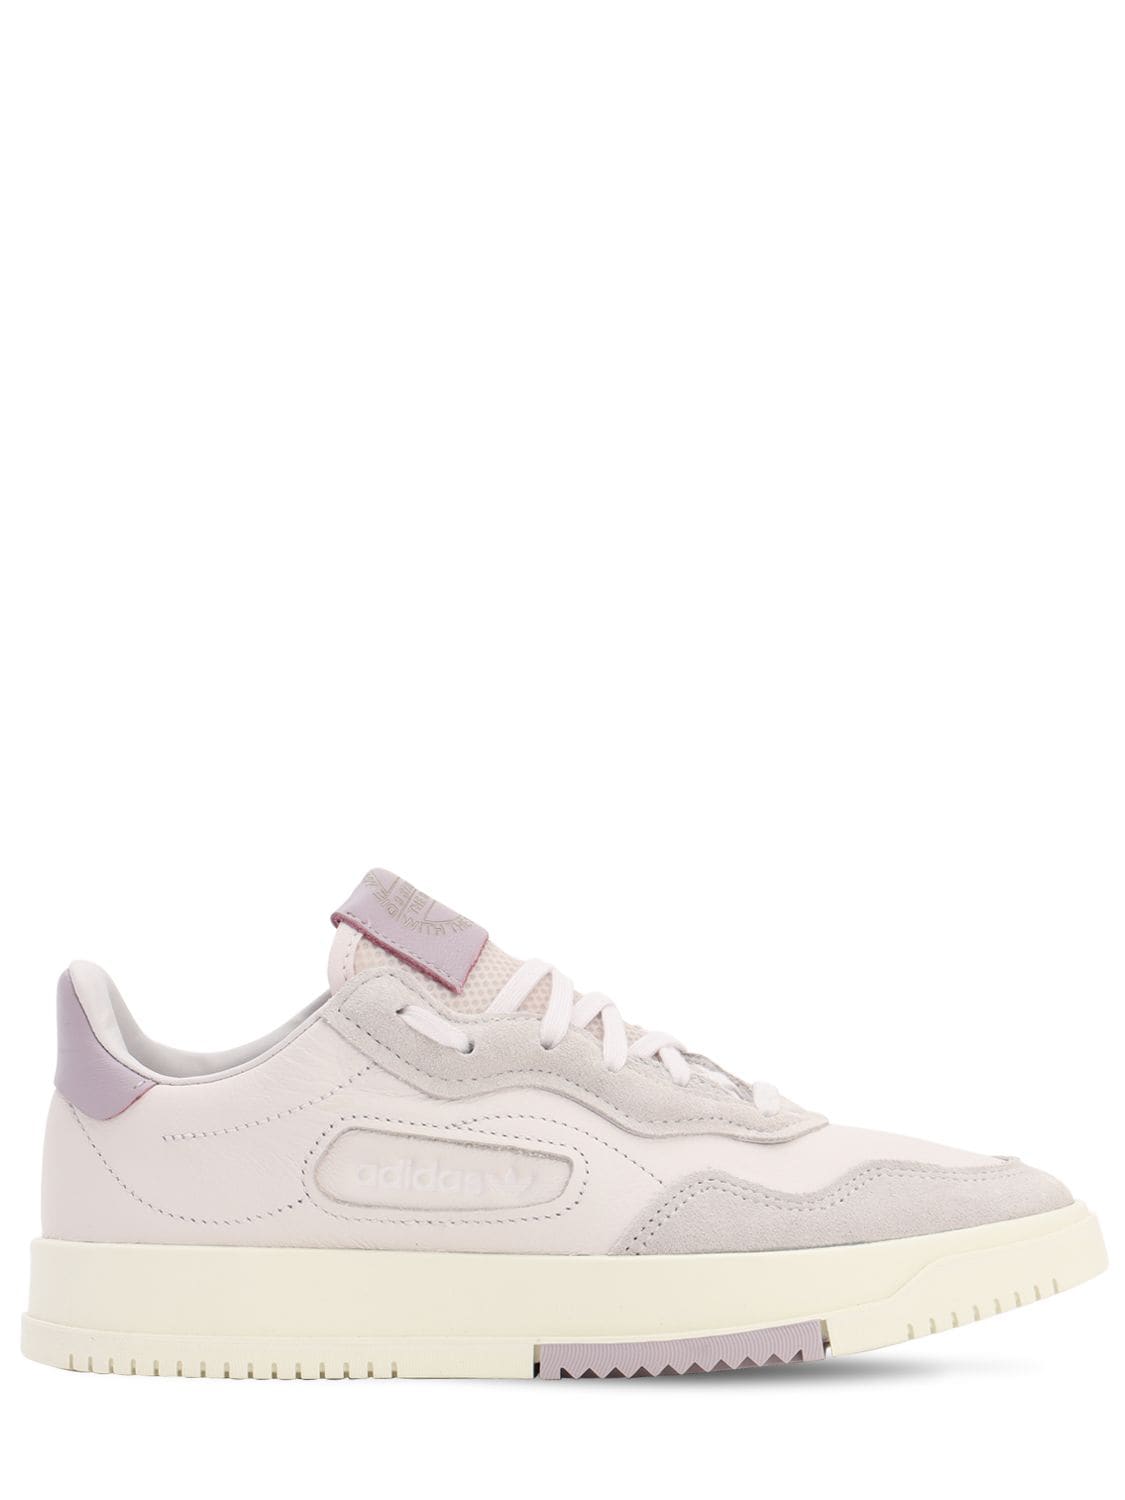 Adidas Originals Sc Premiere Leather Sneakers In Orchid Tint